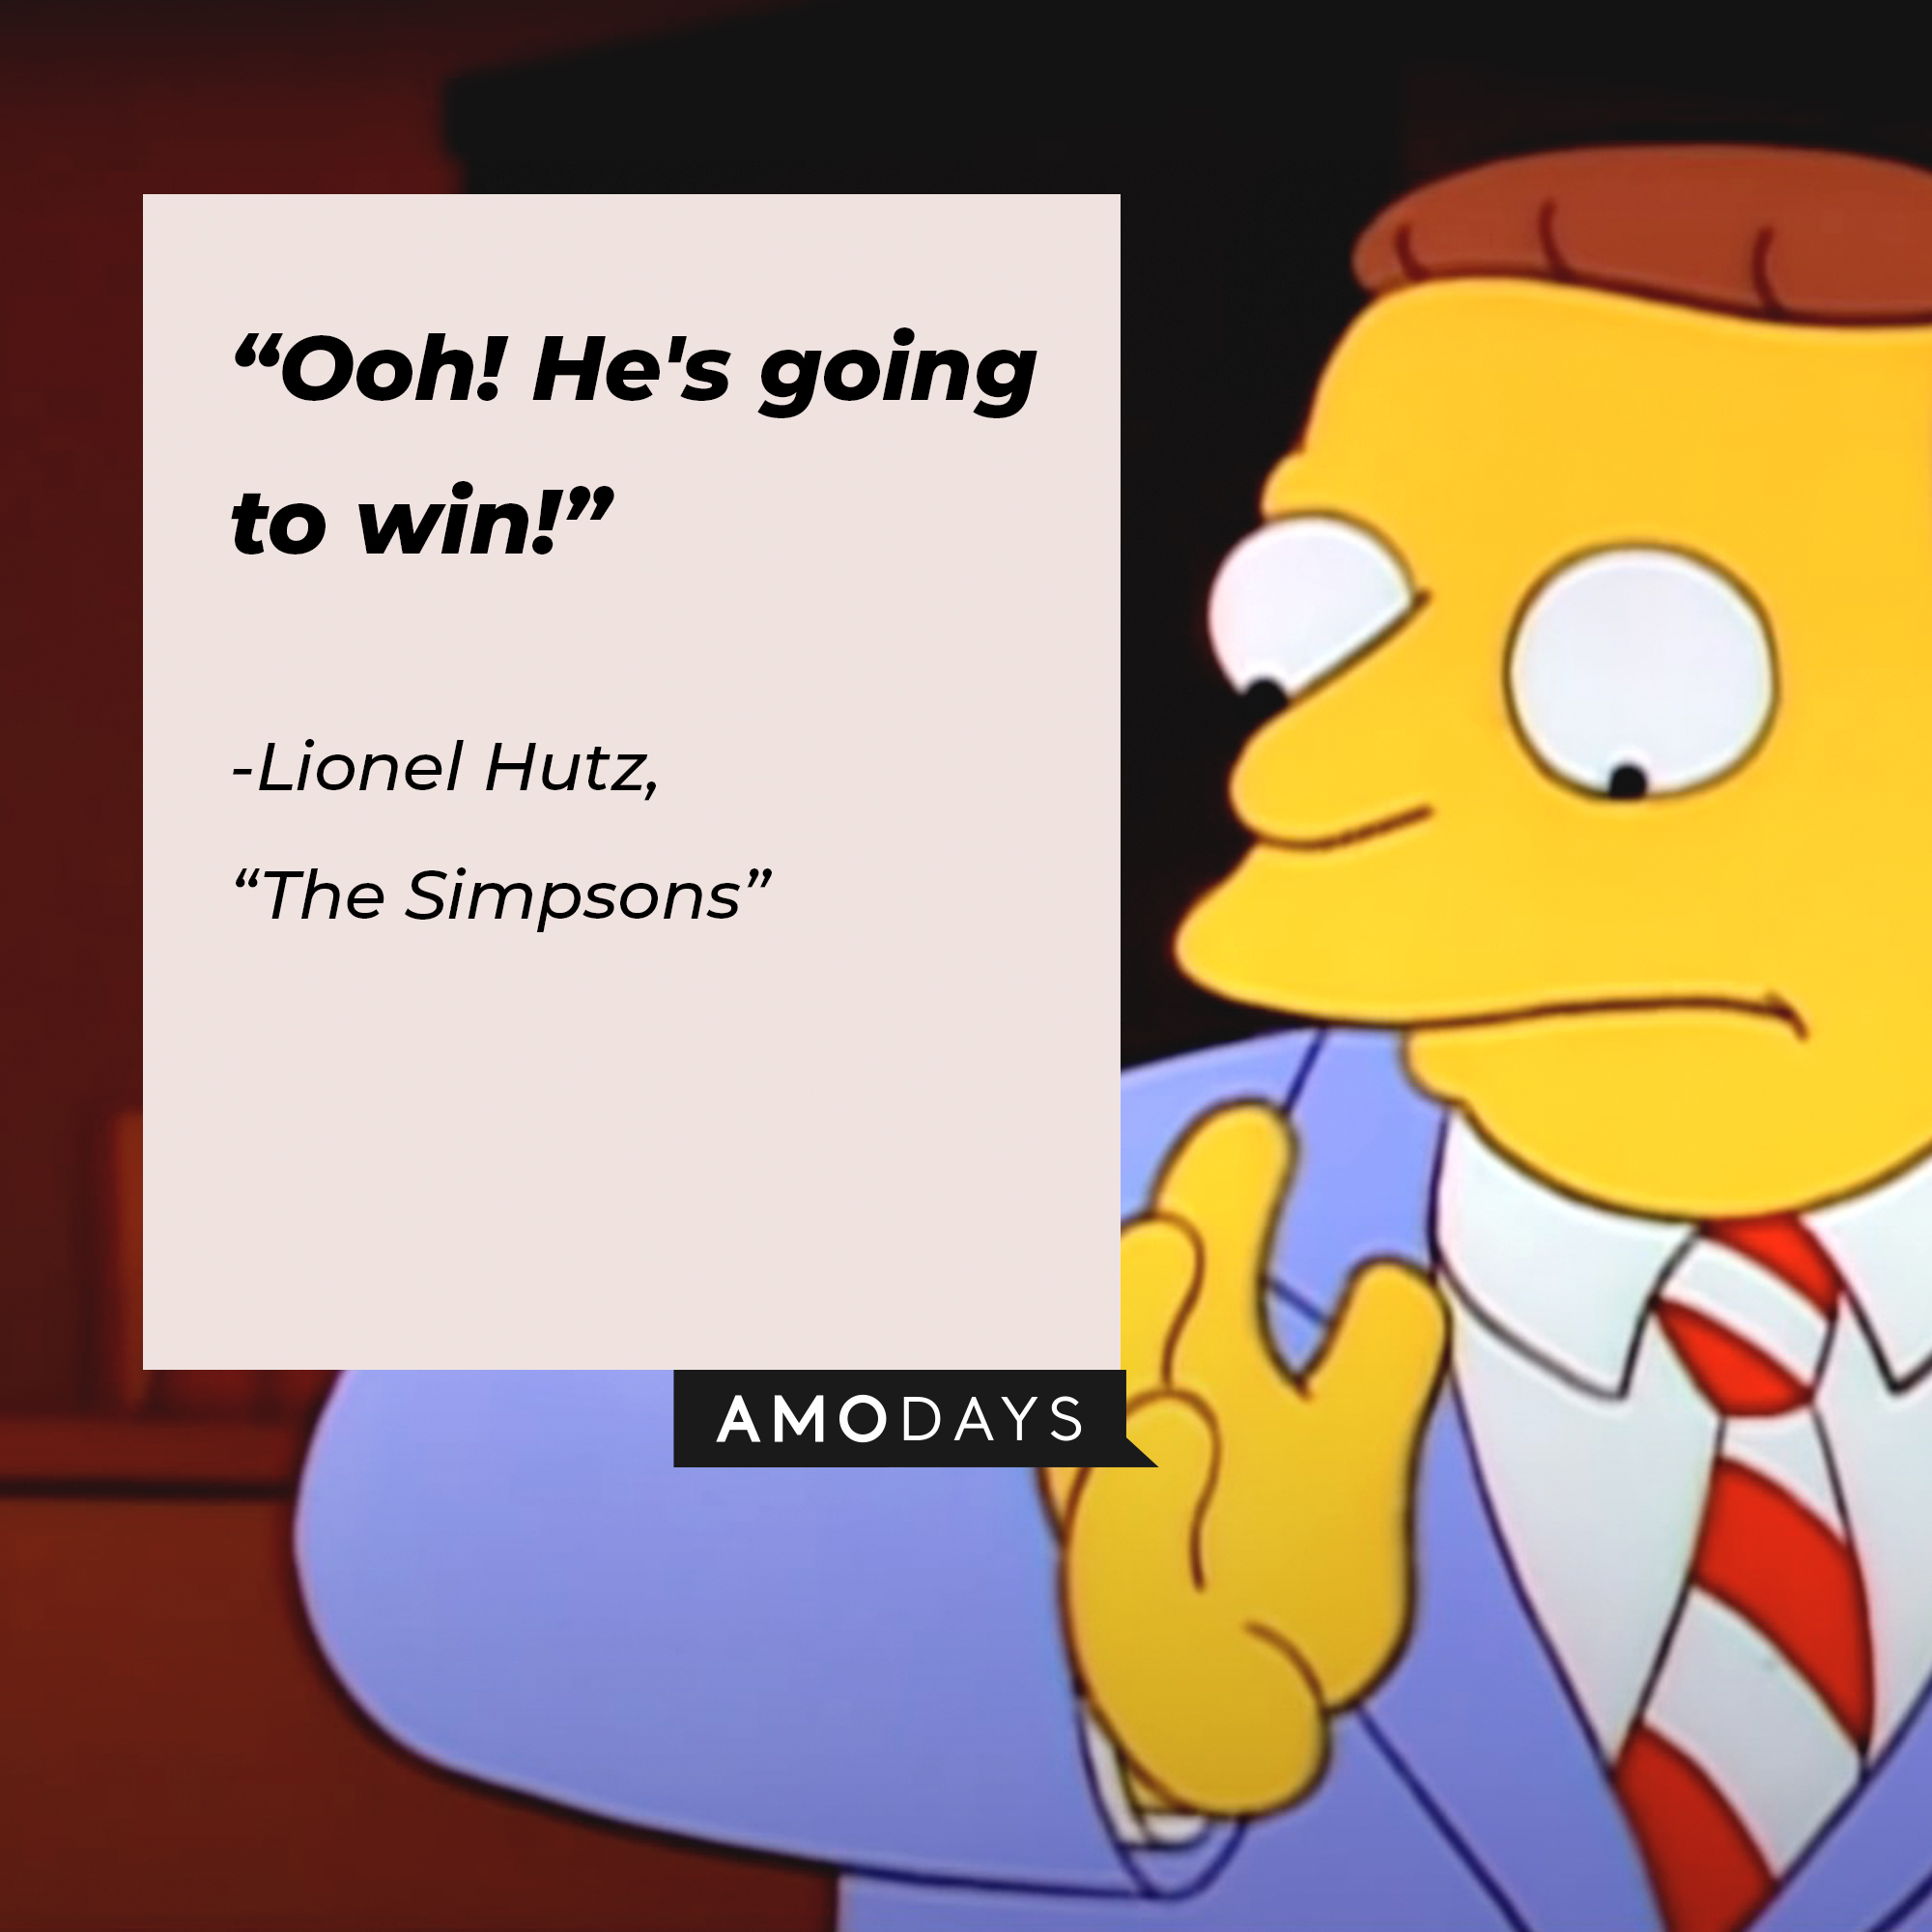 Lionel Hutz’s quote from “The Simpsons”: “Ooh! He's going to win!” | Source: facebook.com/TheSimpsons